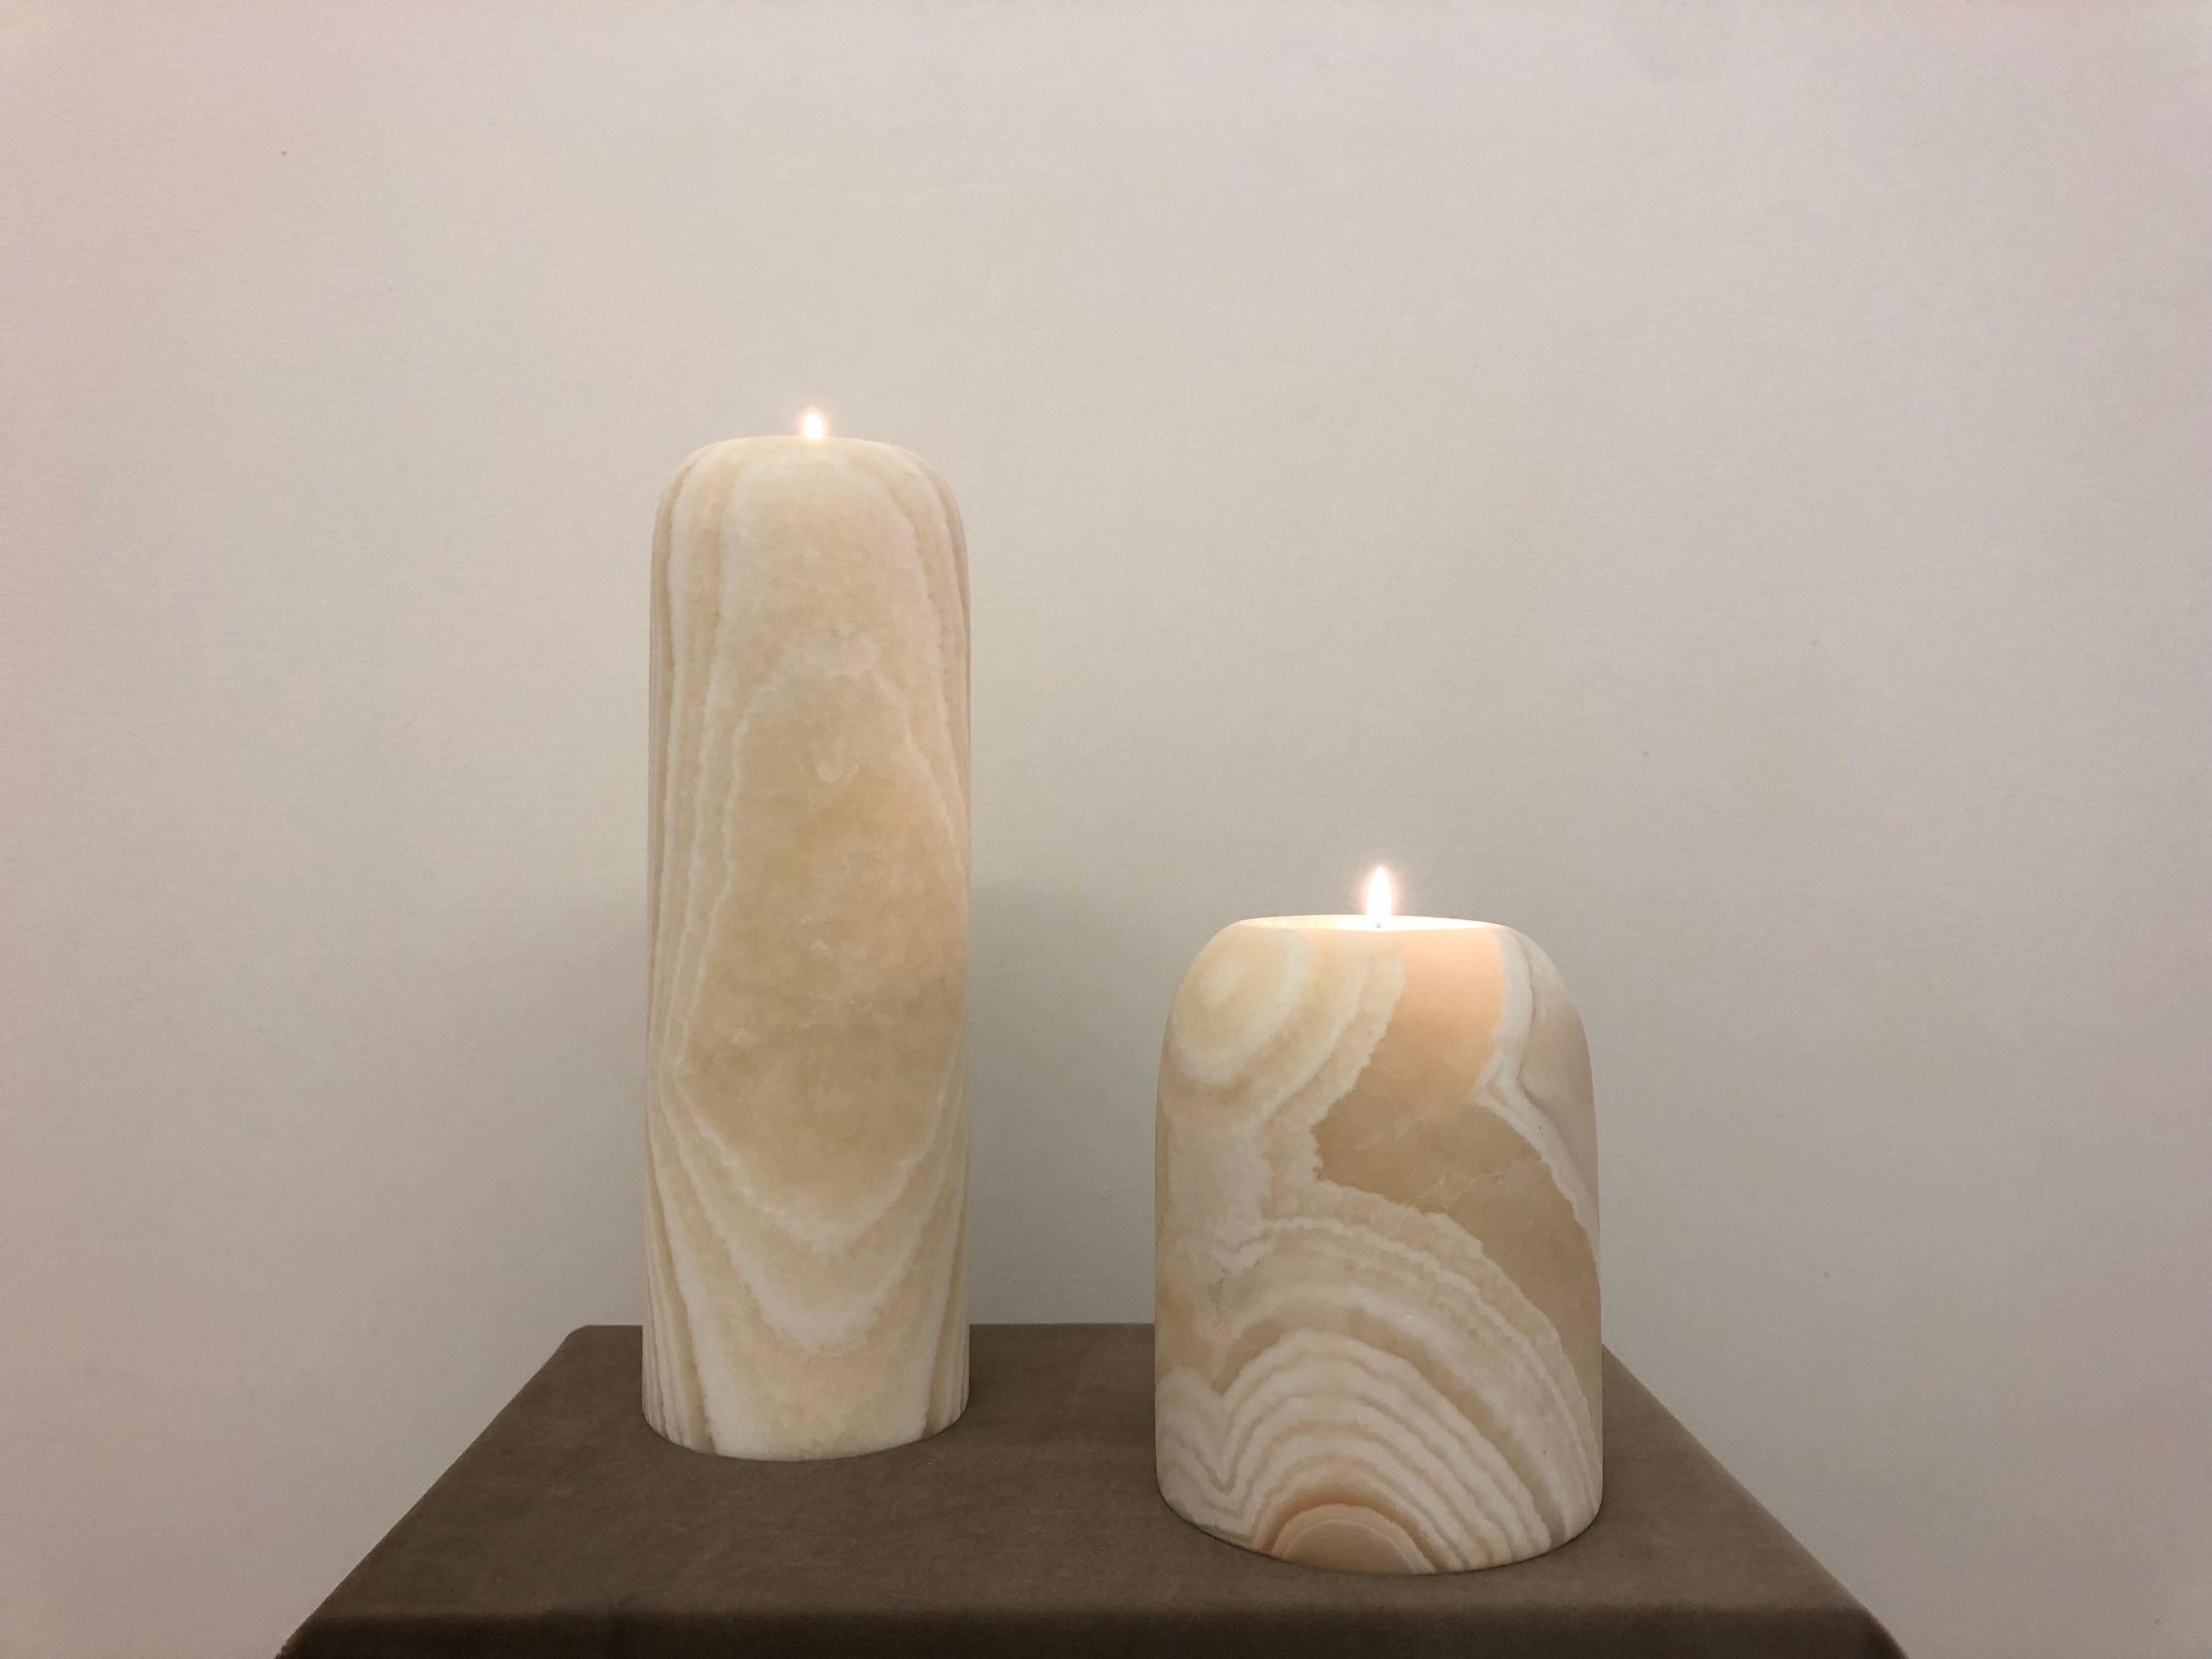 Egyptian Alabaster Candleholder Sculpted by Omar Chakil